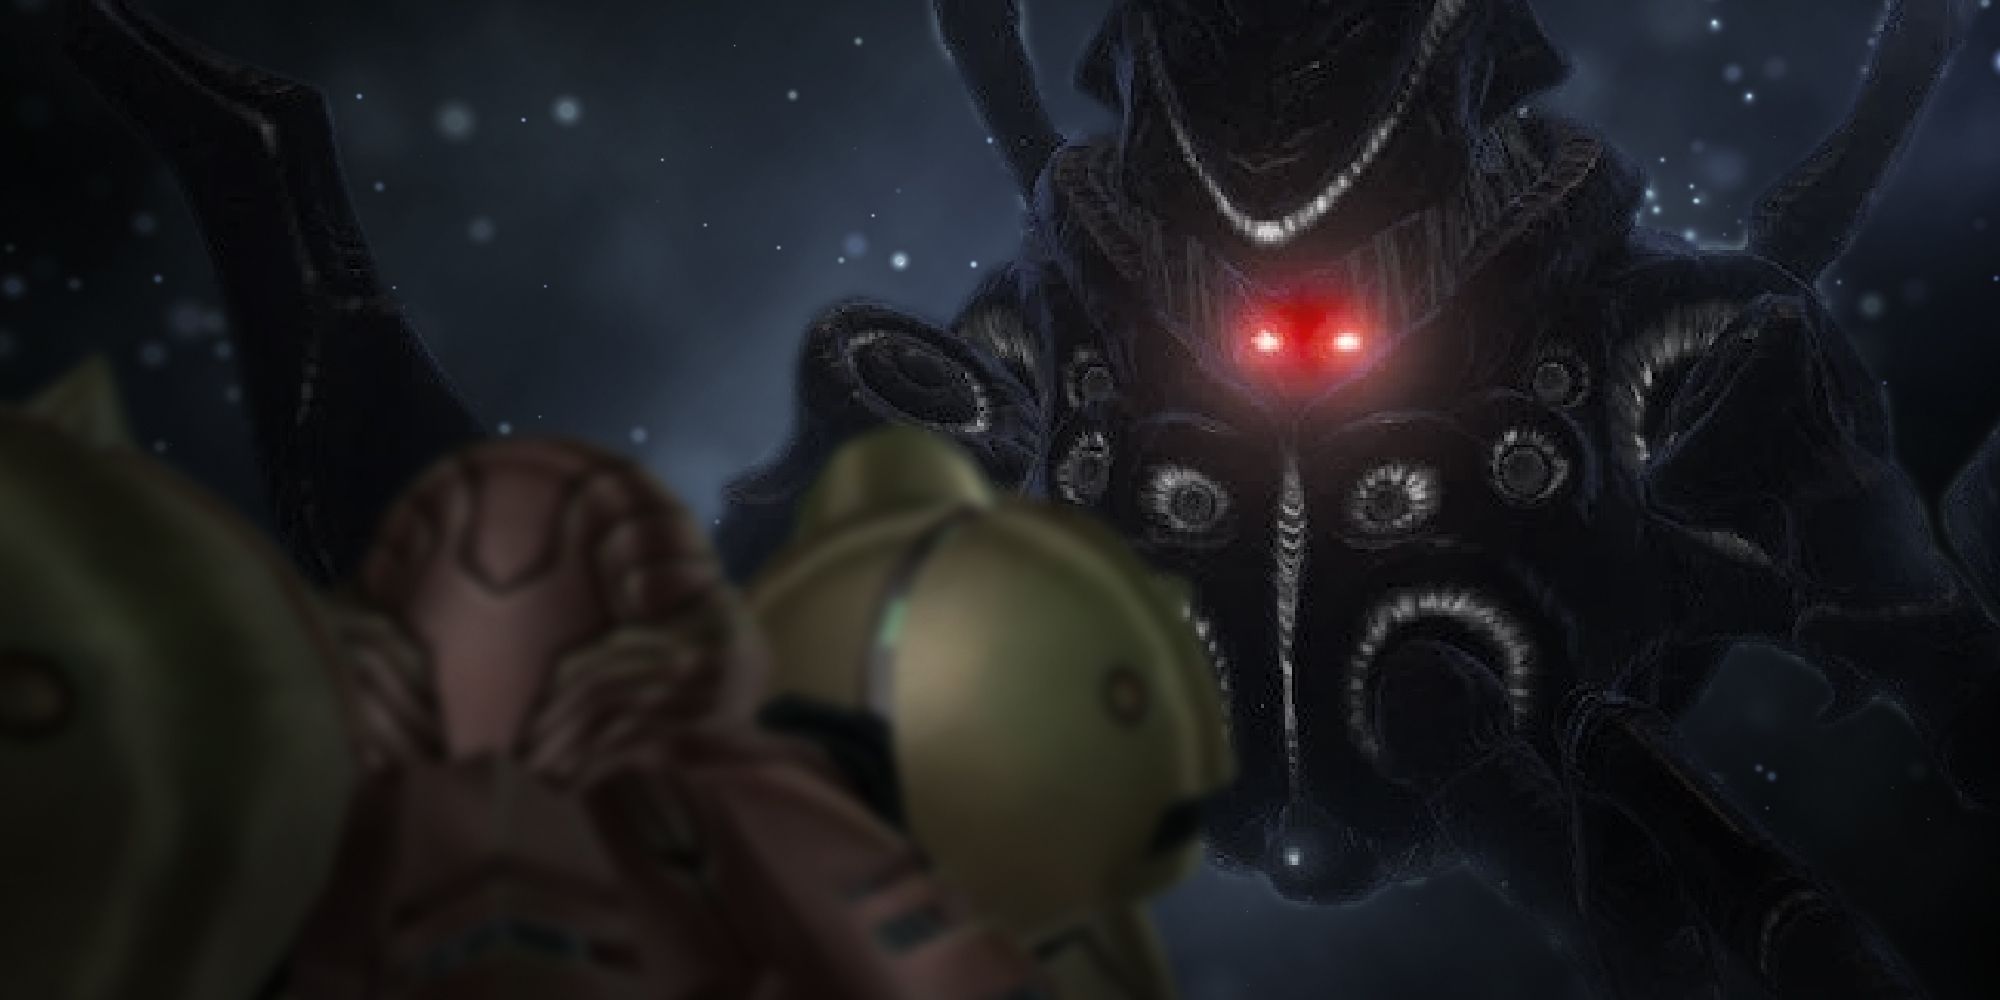 Samus facing off against the Metroid Prime with glowing red eyes